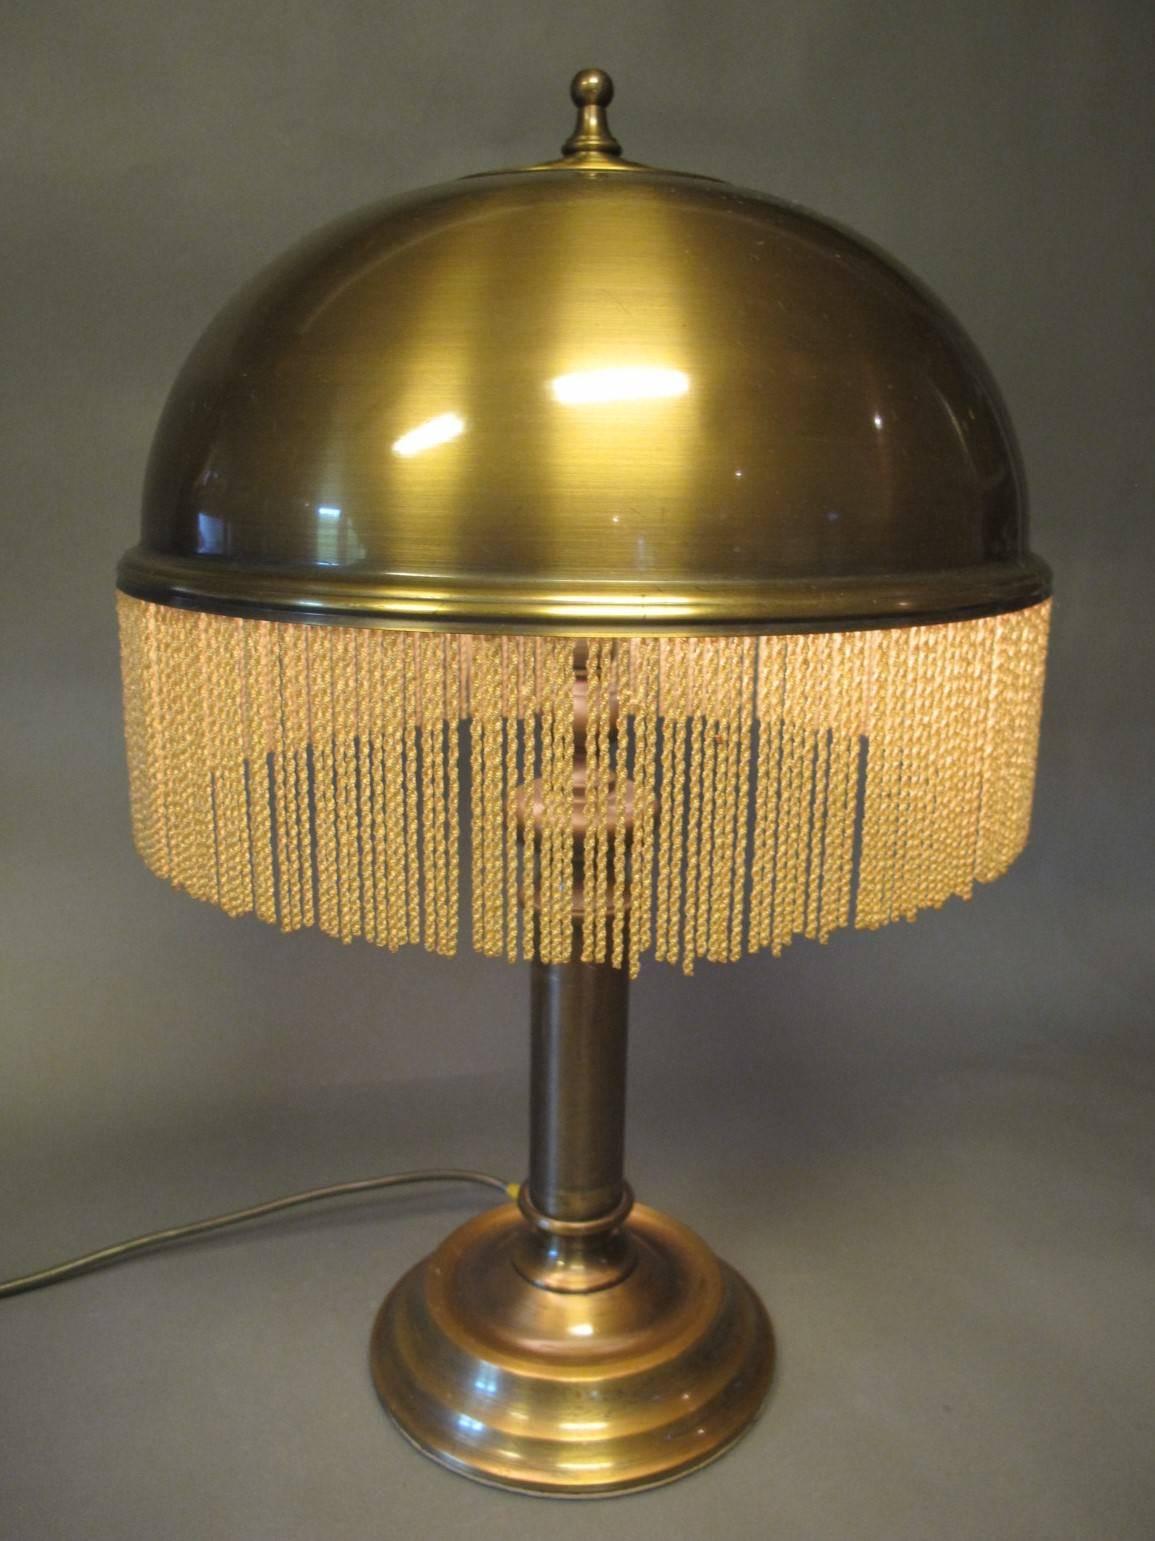 Art Deco table lamp brass and fringe. It has two bulbs. The lamp leaves a soft and beautiful light on the surroundings. The lamp has some marks from use, but very original and beautiful.